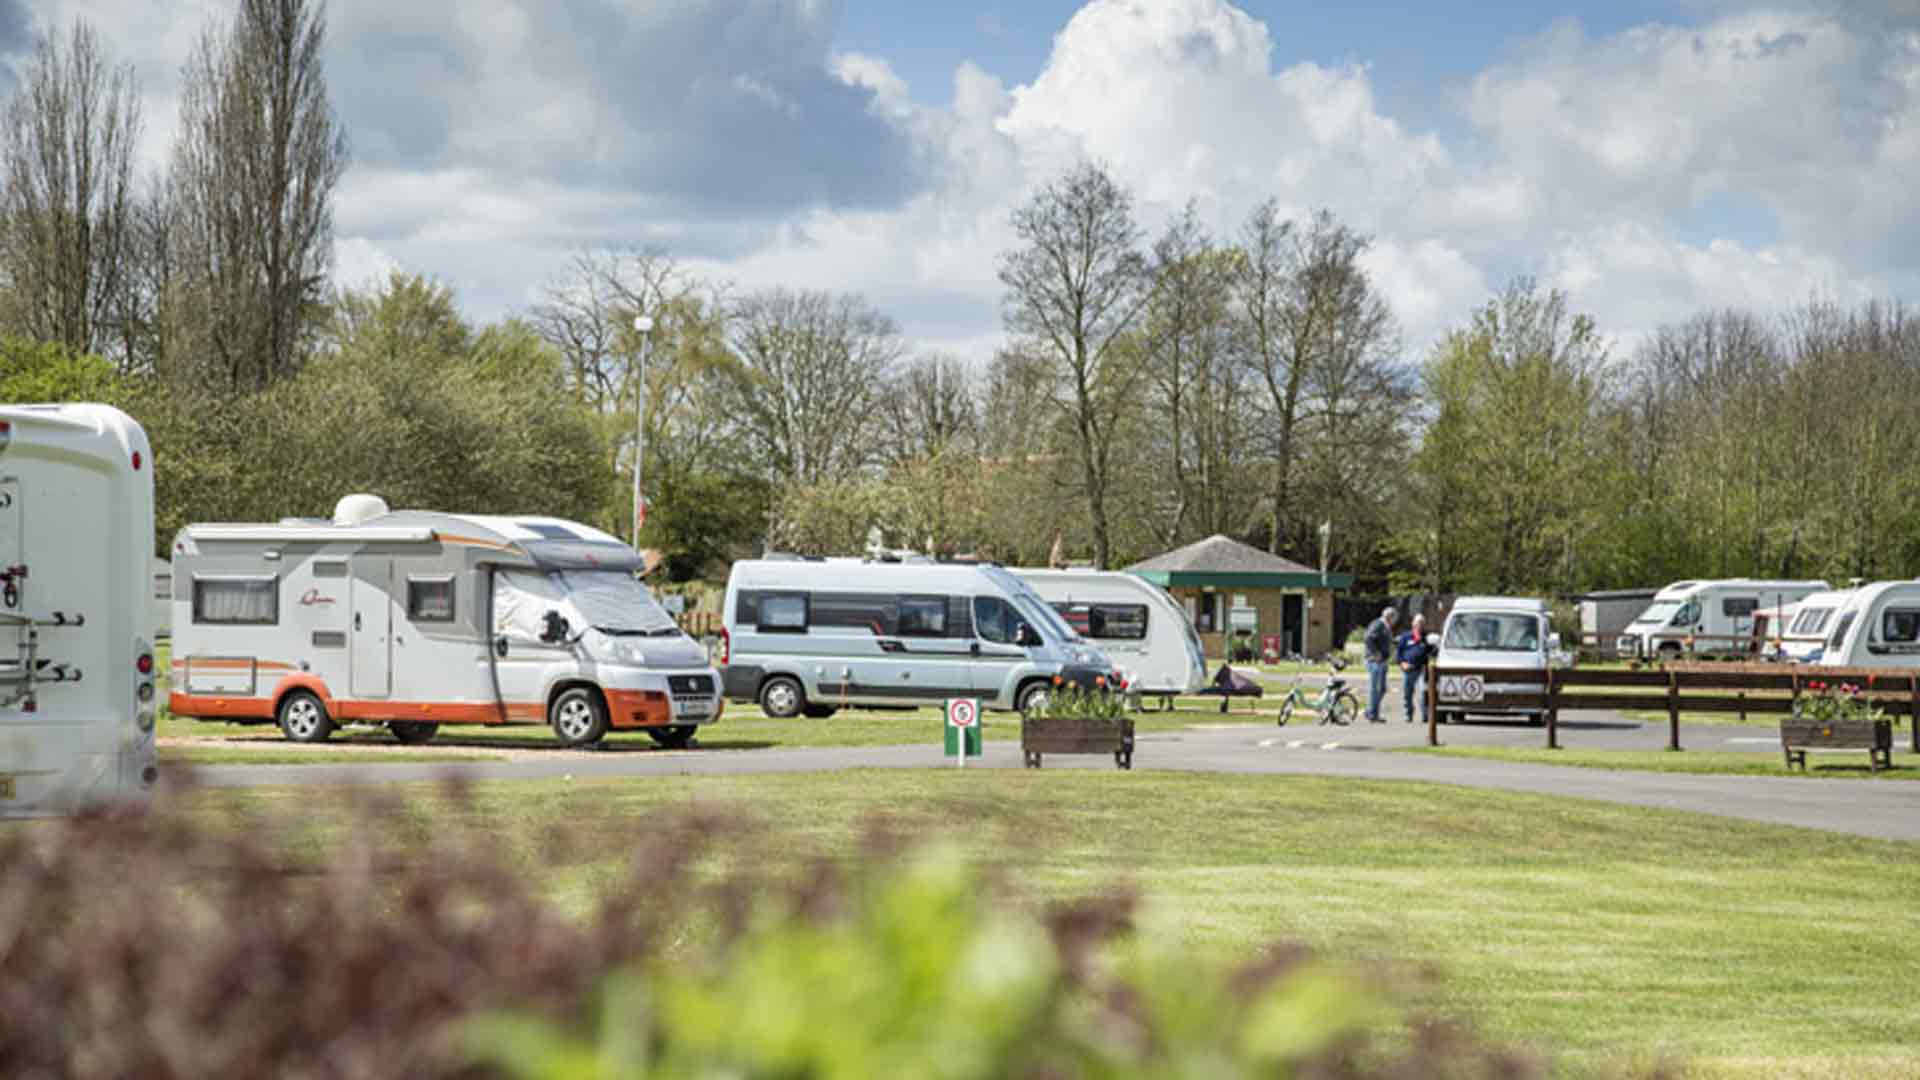 Campervans and caravans pitched up on Cambridge Campsite